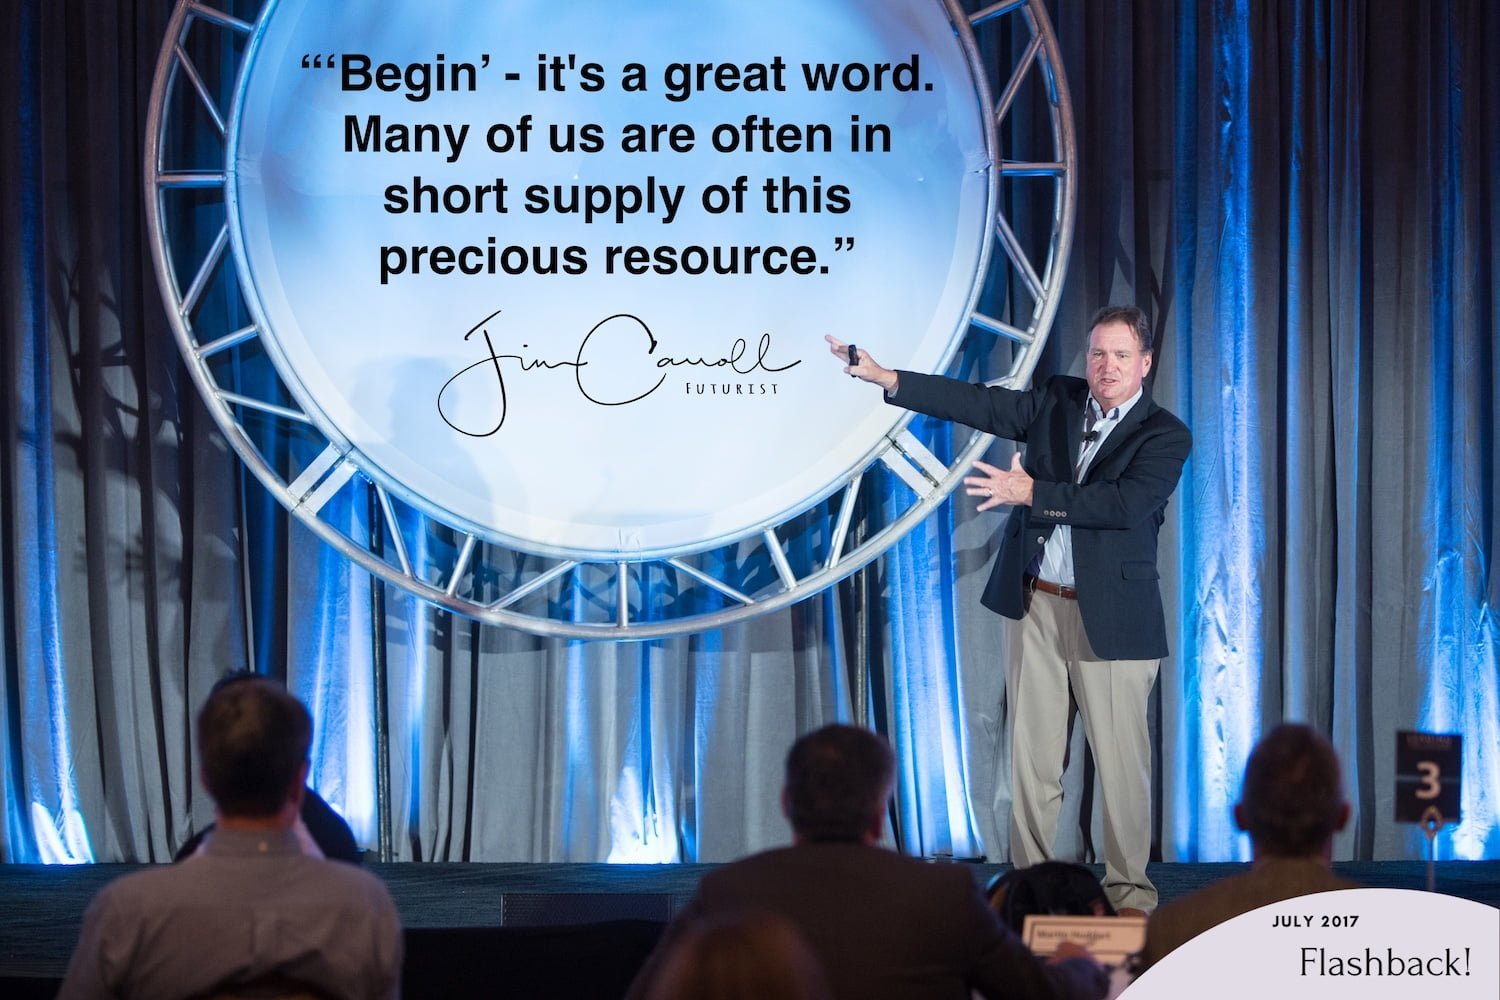 Daily Inspiration: “‘Begin’ - it's a great word. Many of us are often in short supply of this precious resource.”